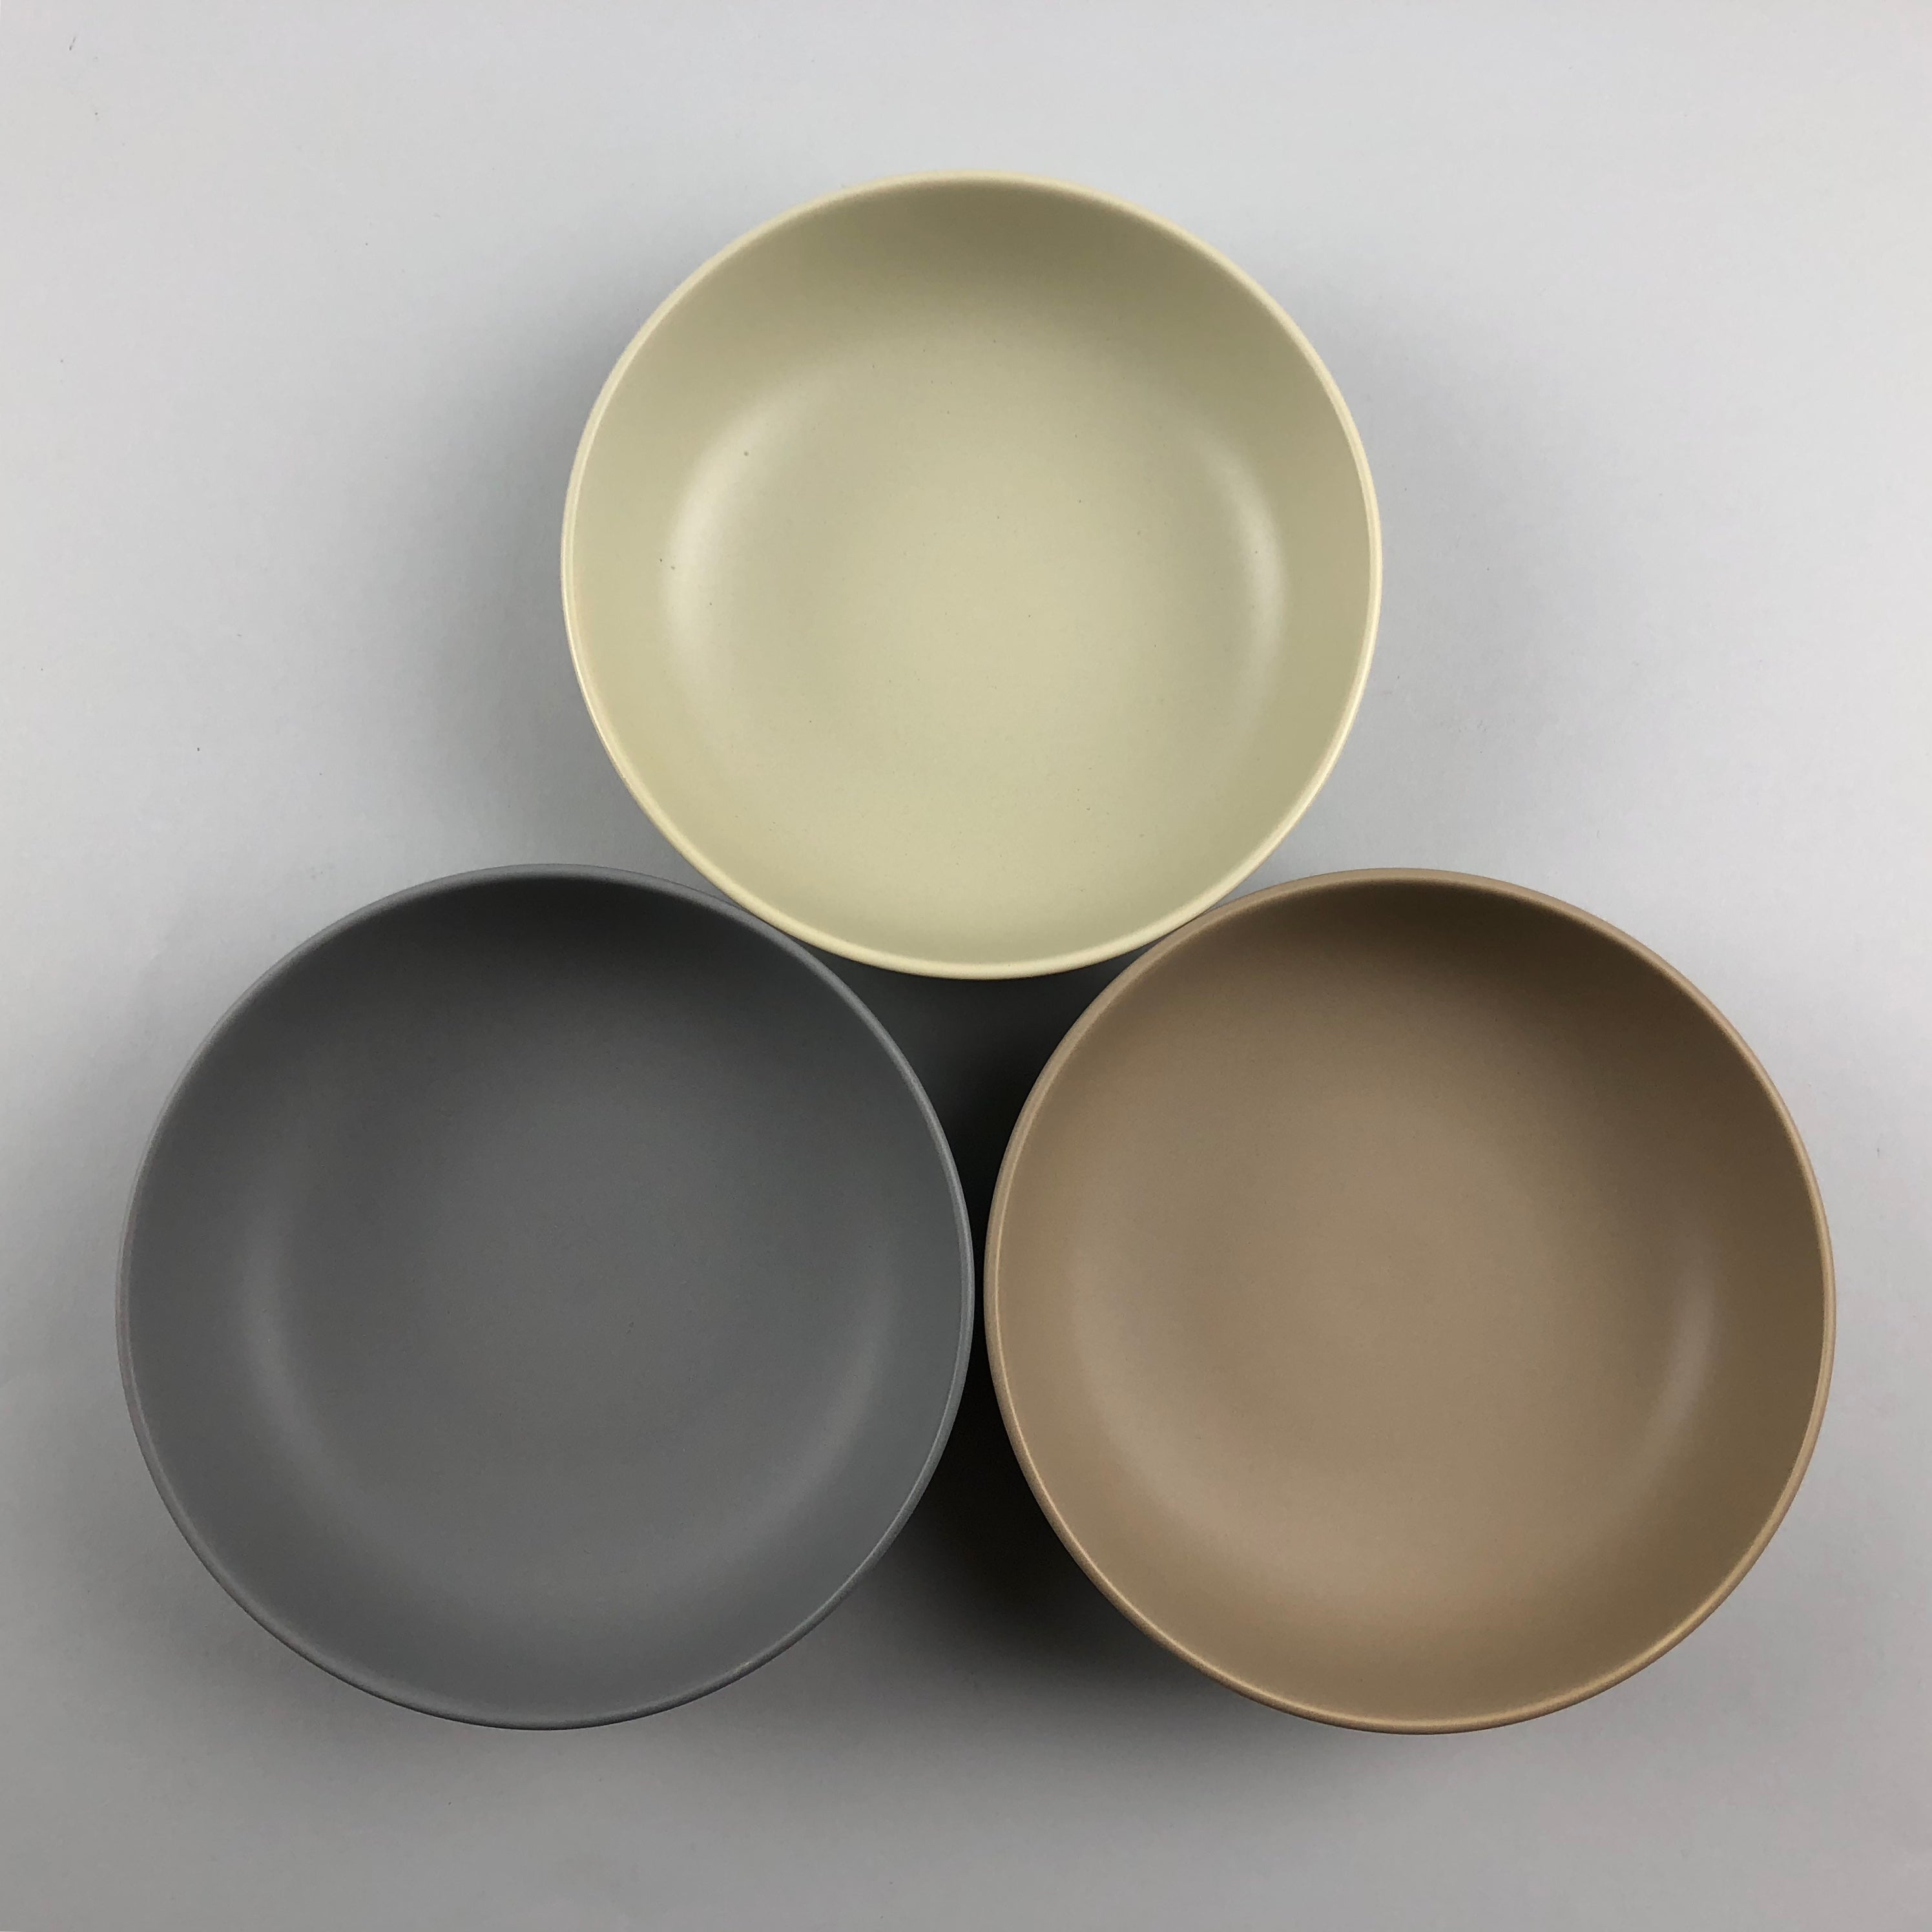 Matte Organic Shaped Bowl, 32 oz in gray, taupe(brown), and pistachio(beige)